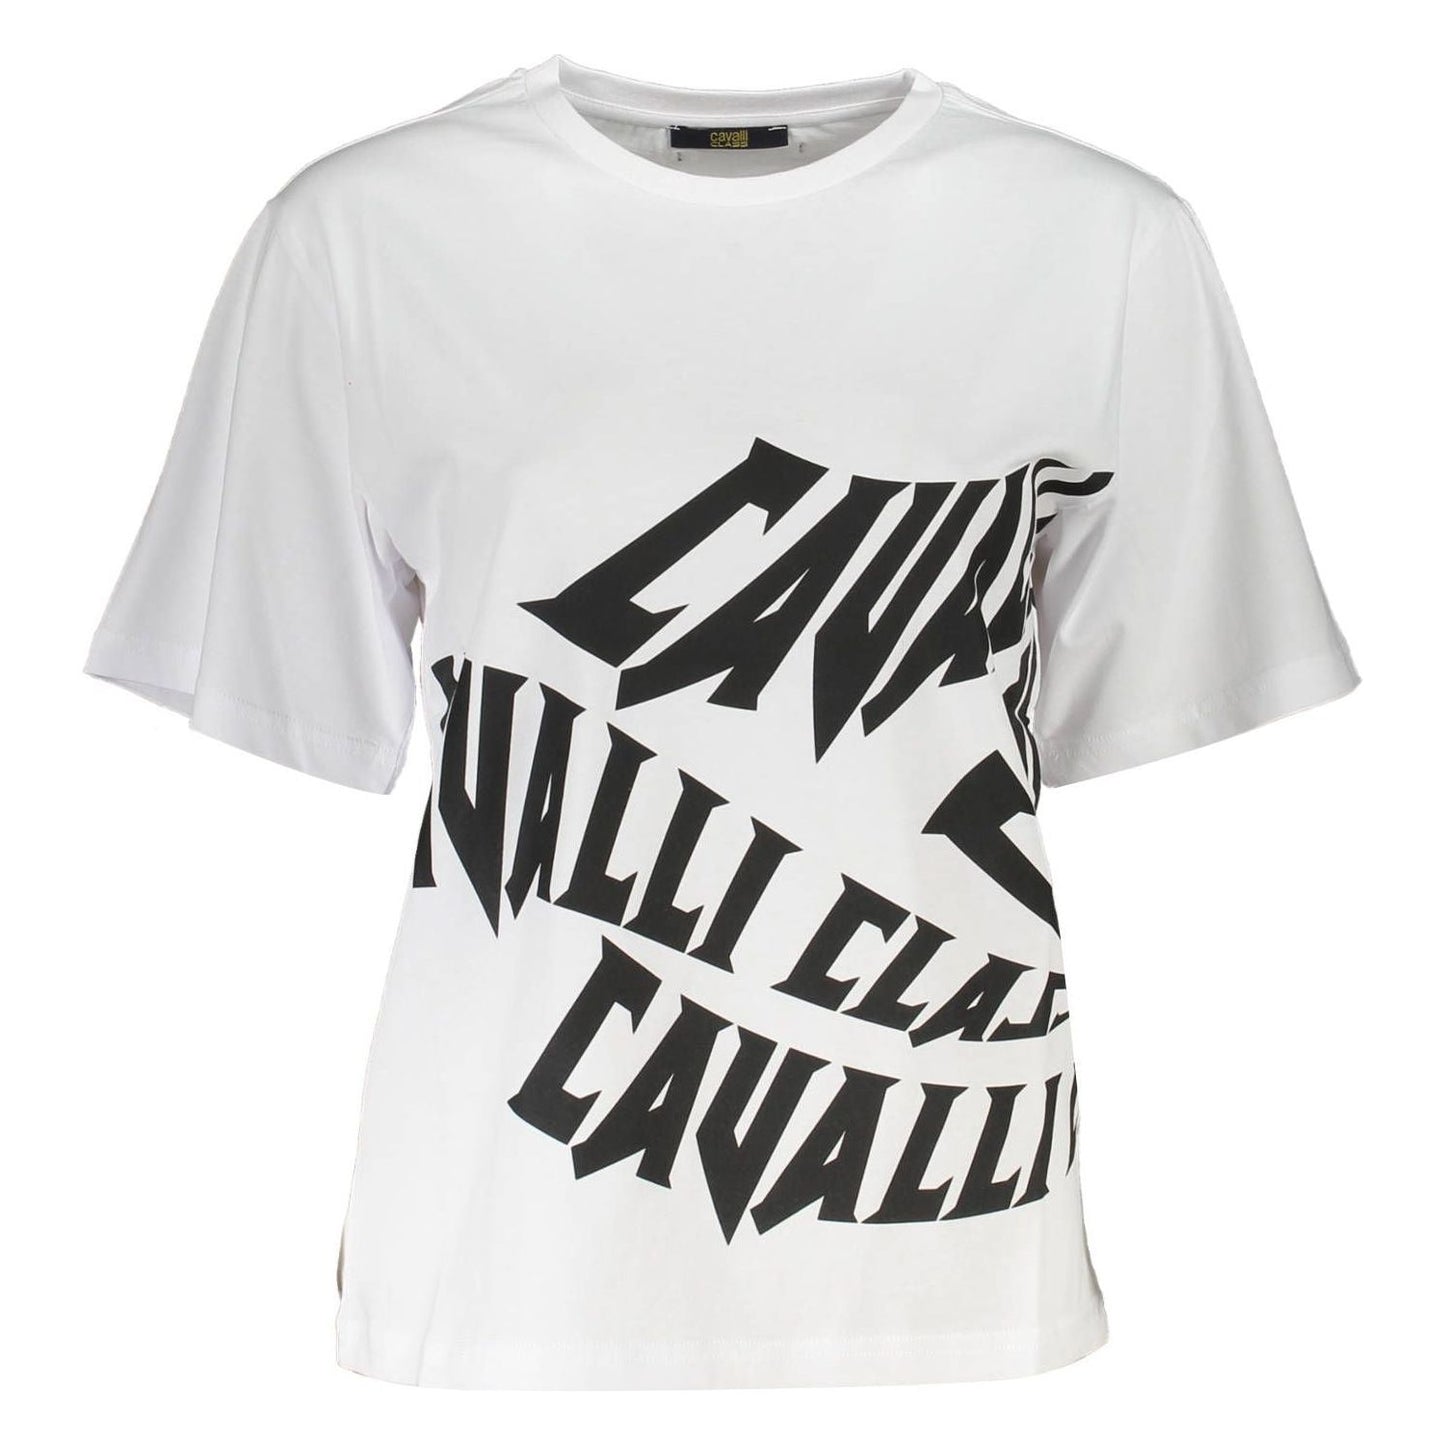 Cavalli Class Chic White Printed Tee with Classic Elegance chic-white-printed-tee-with-classic-elegance